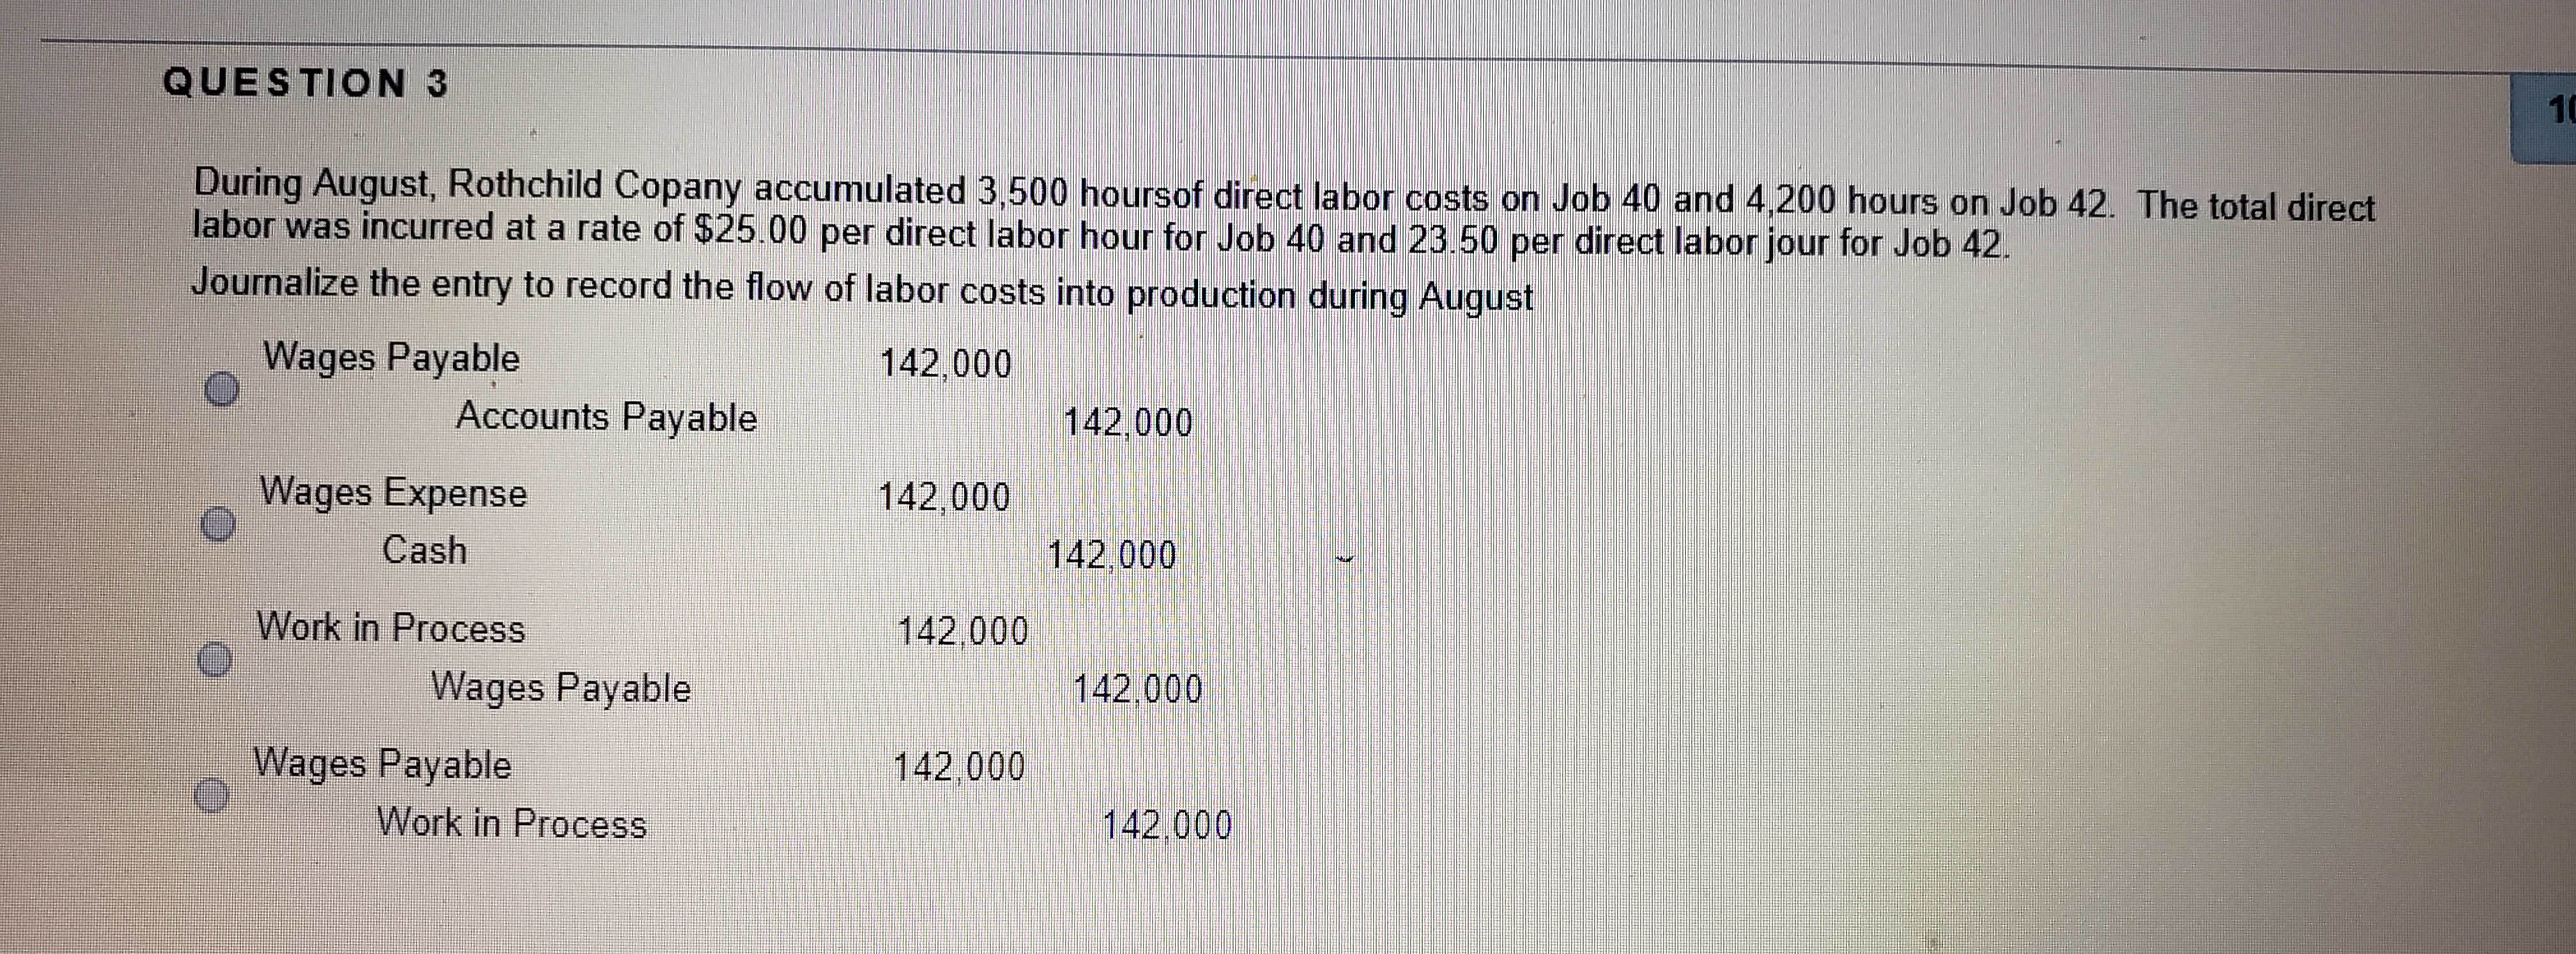 During August, Rothchild Copany accumulated 3,500 hoursof direct labor costs on Job 40 and 4,200 hours on Job 42. The total direct
labor was incurred at a rate of $25.00 per direct labor hour for Job 40 and 23.50 per direct labor jour for Job 42.
Journalize the entry to record the flow of labor costs into production during August
